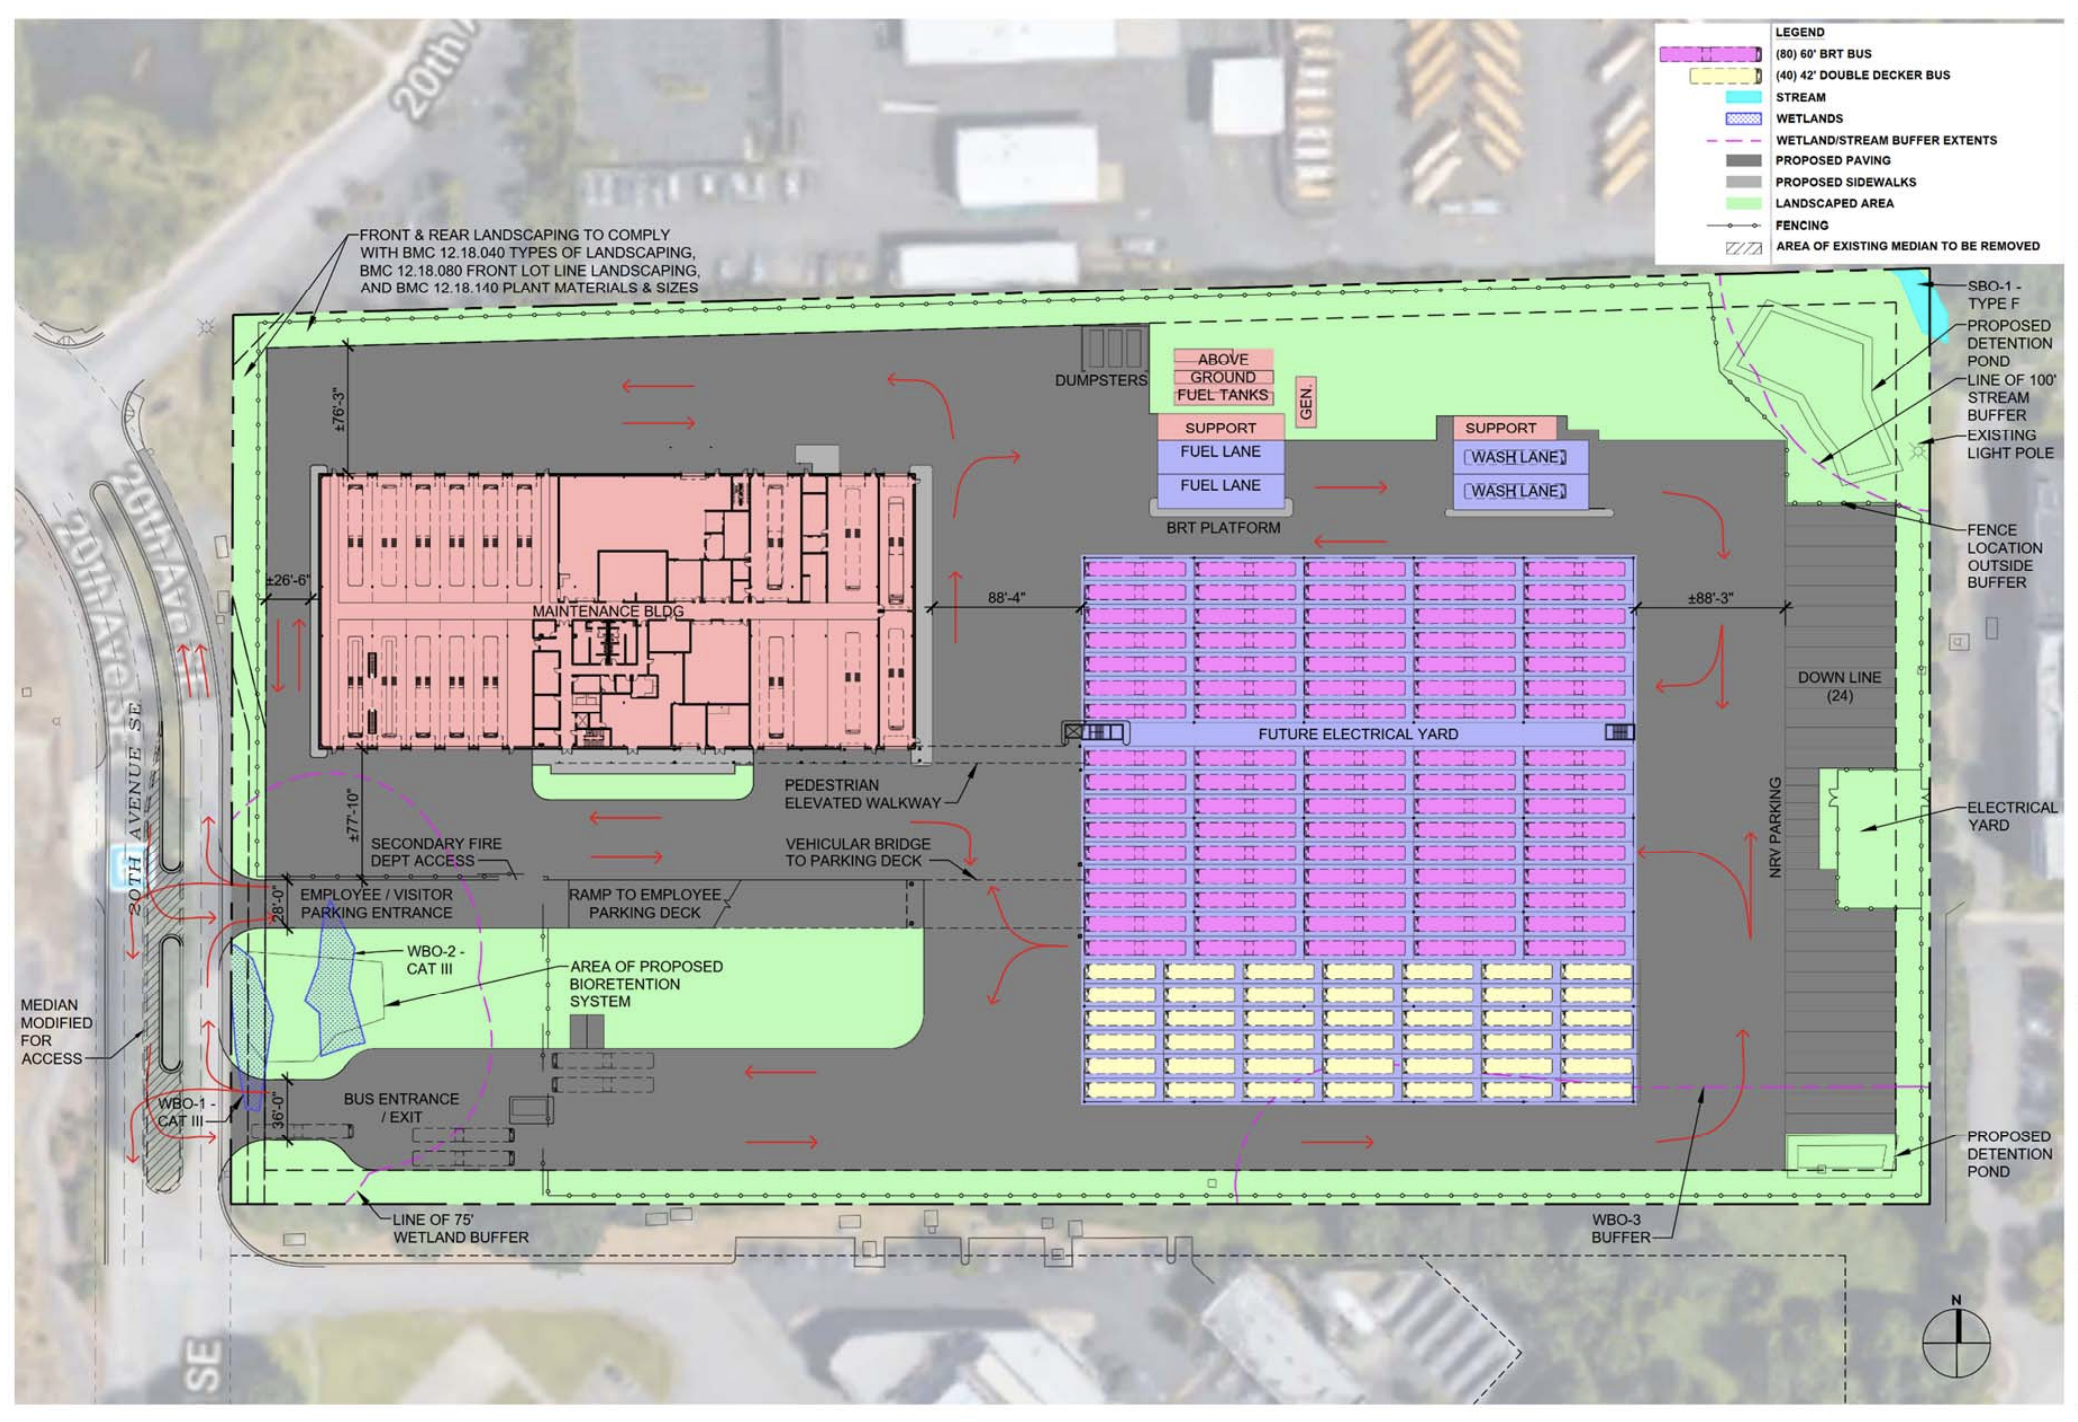 Preliminary site plan layout of the bus base. (Sound Transit)